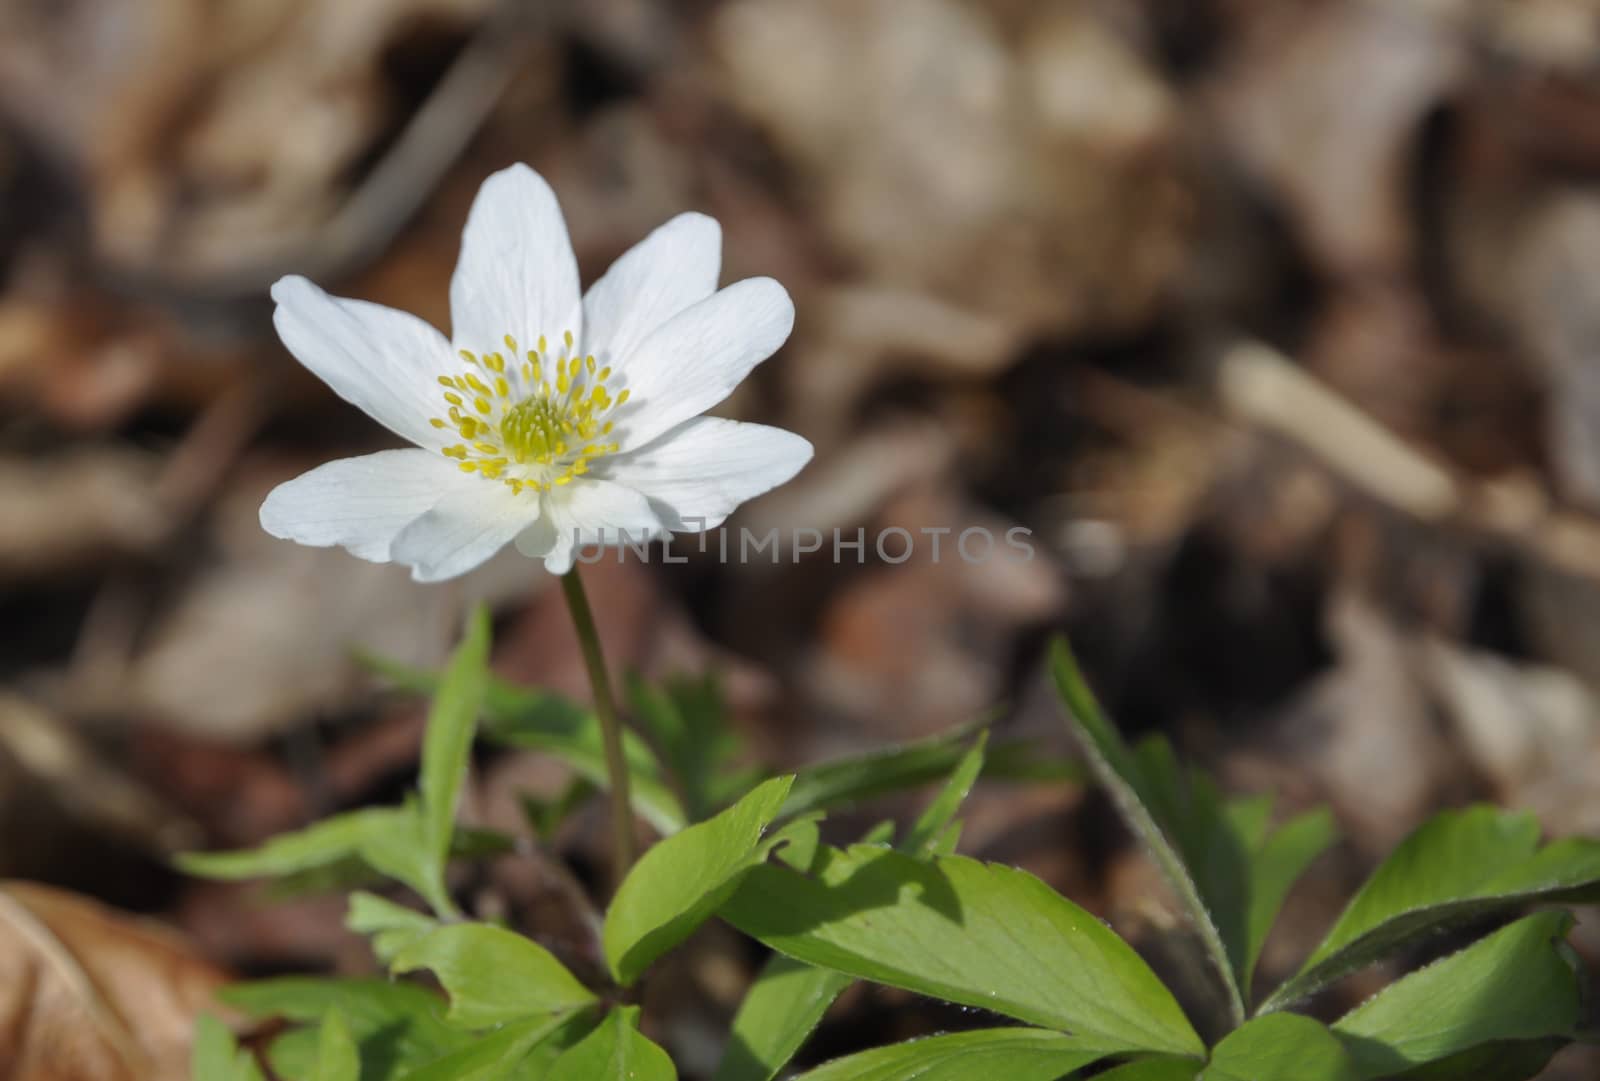 Anemone nemorosa is an early-spring flowering plant in the genus Anemone in the family Ranunculaceae, native to Europe. Common names include wood anemone, windflower, thimbleweed, and smell fox, an allusion to the musky smell of the leaves. It is a perennial herbaceous plant growing 5–15 centimetres (2.0–5.9 in) tall.